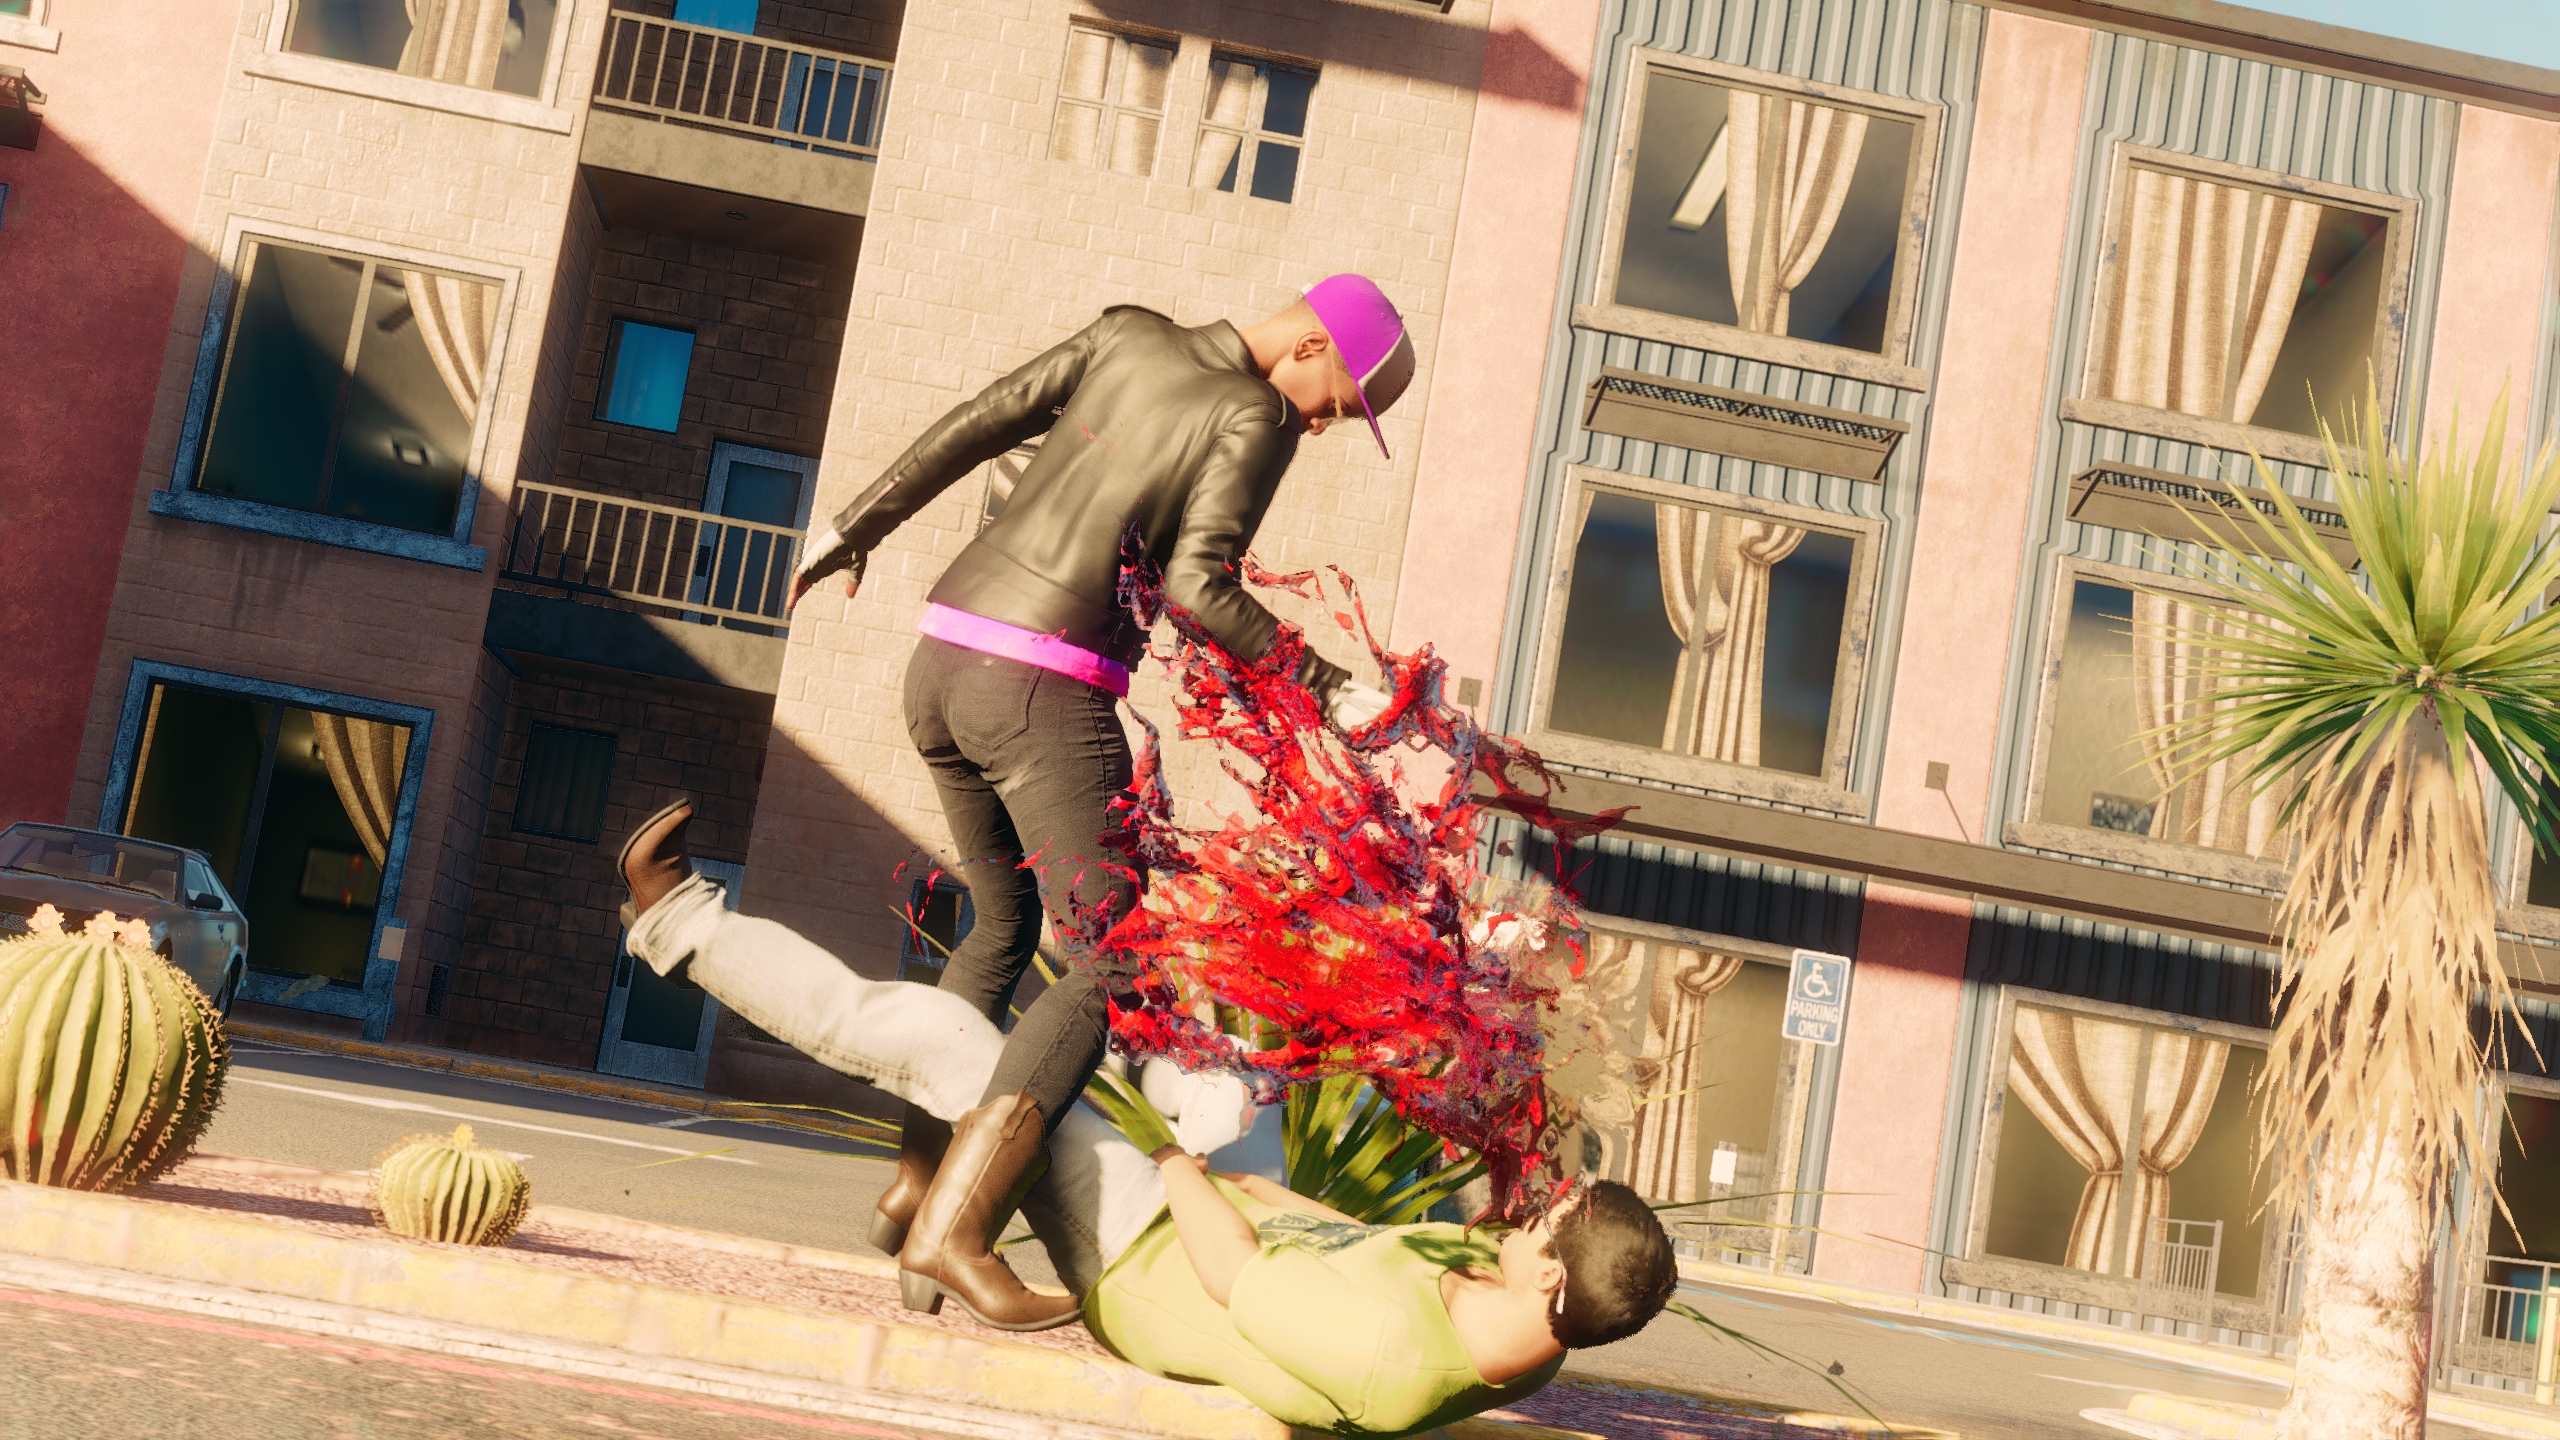 A bloody stabbing animation in Saints Row